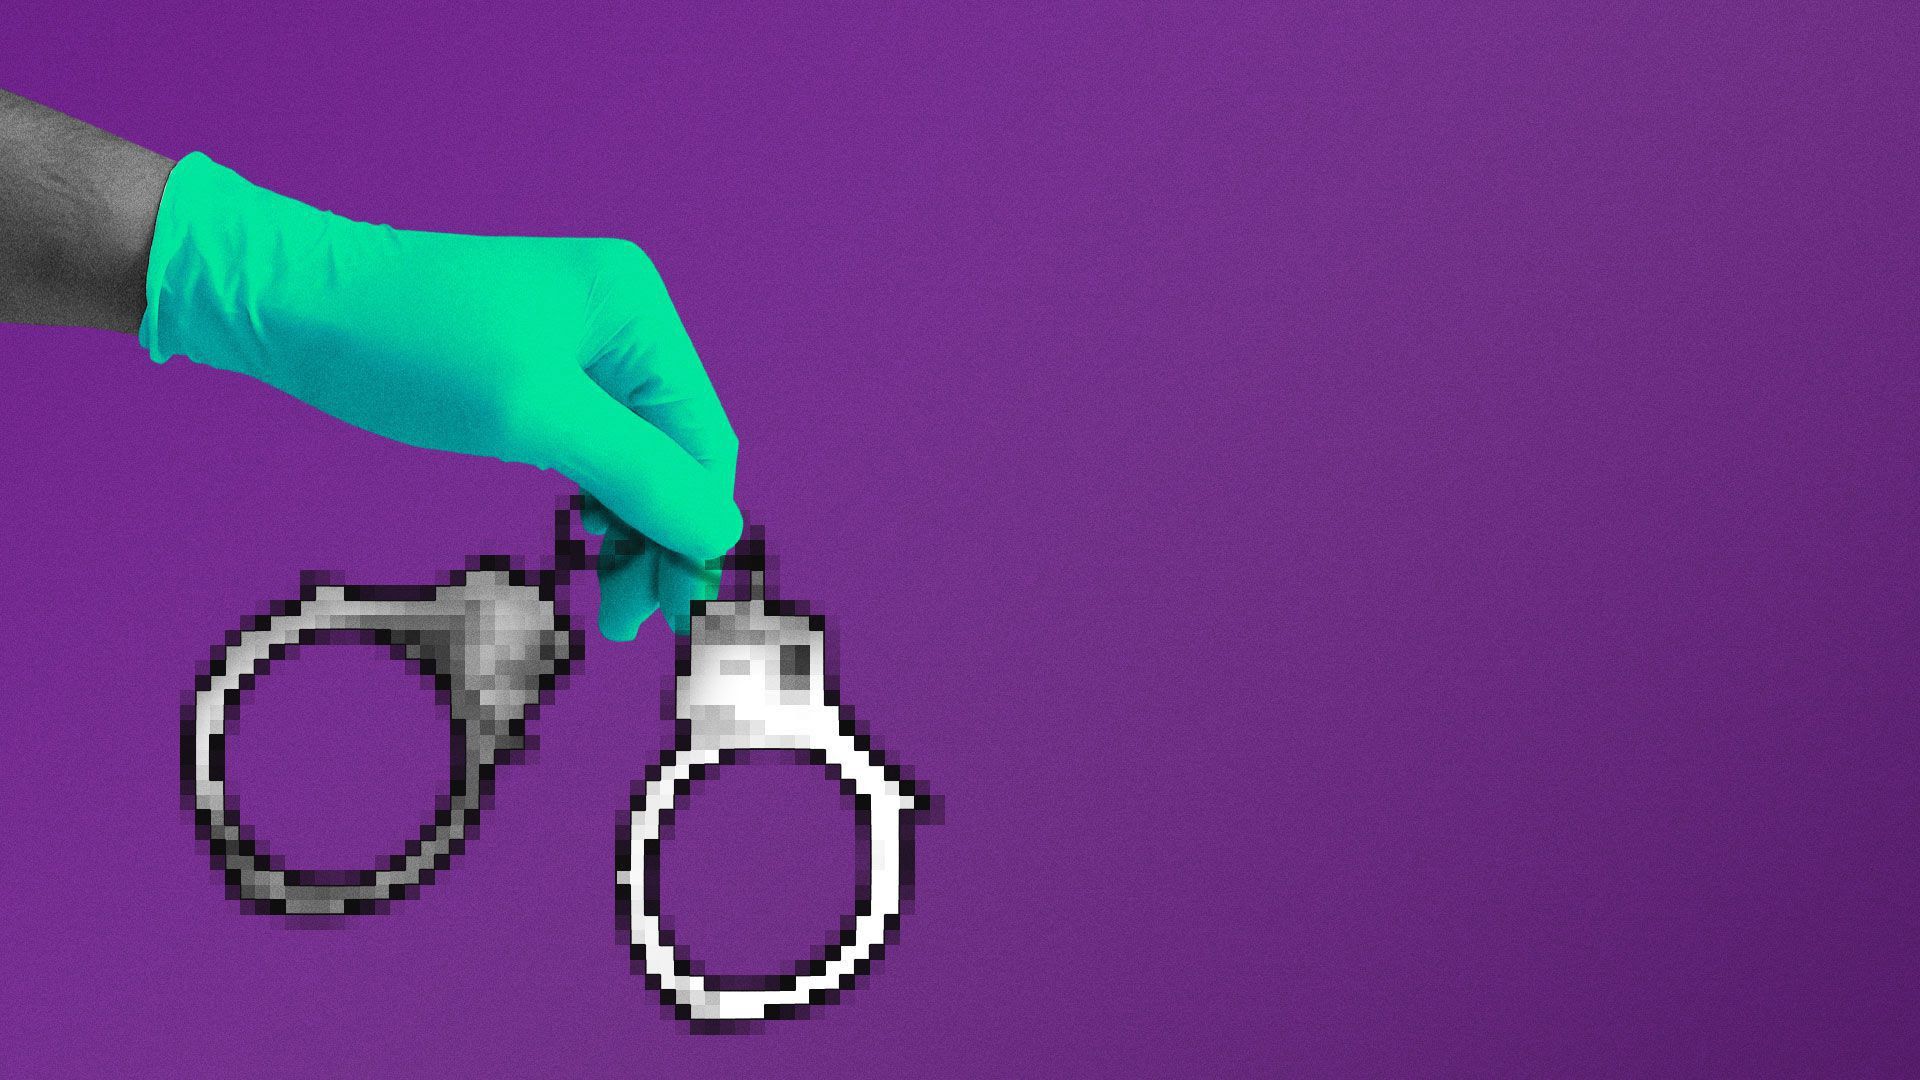 An illustration of a hand with gloves holding handcuffs.